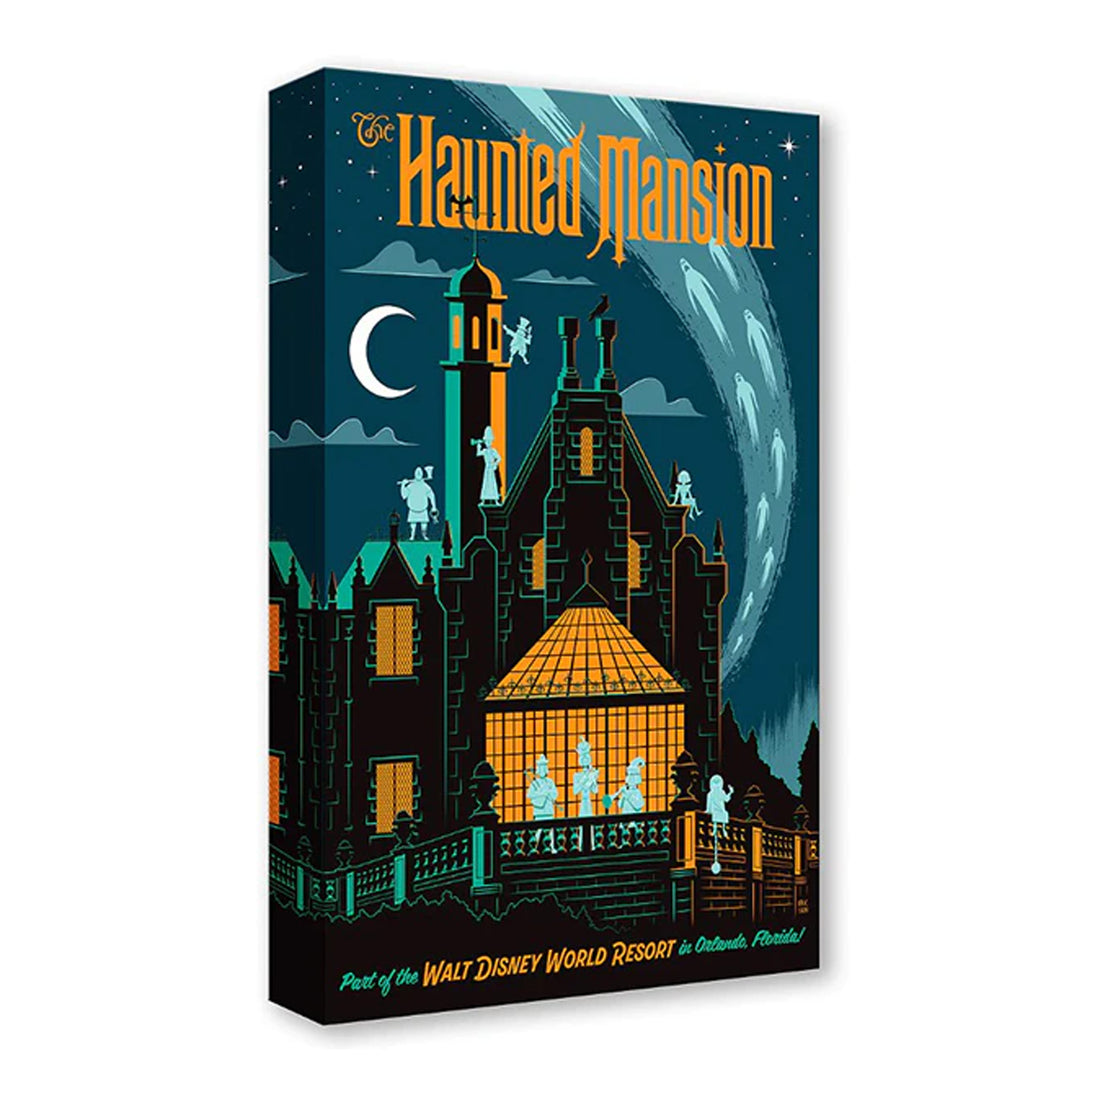 Artwork inspired by the Walt Disney World Resort famous attraction - The Haunted Mansion.